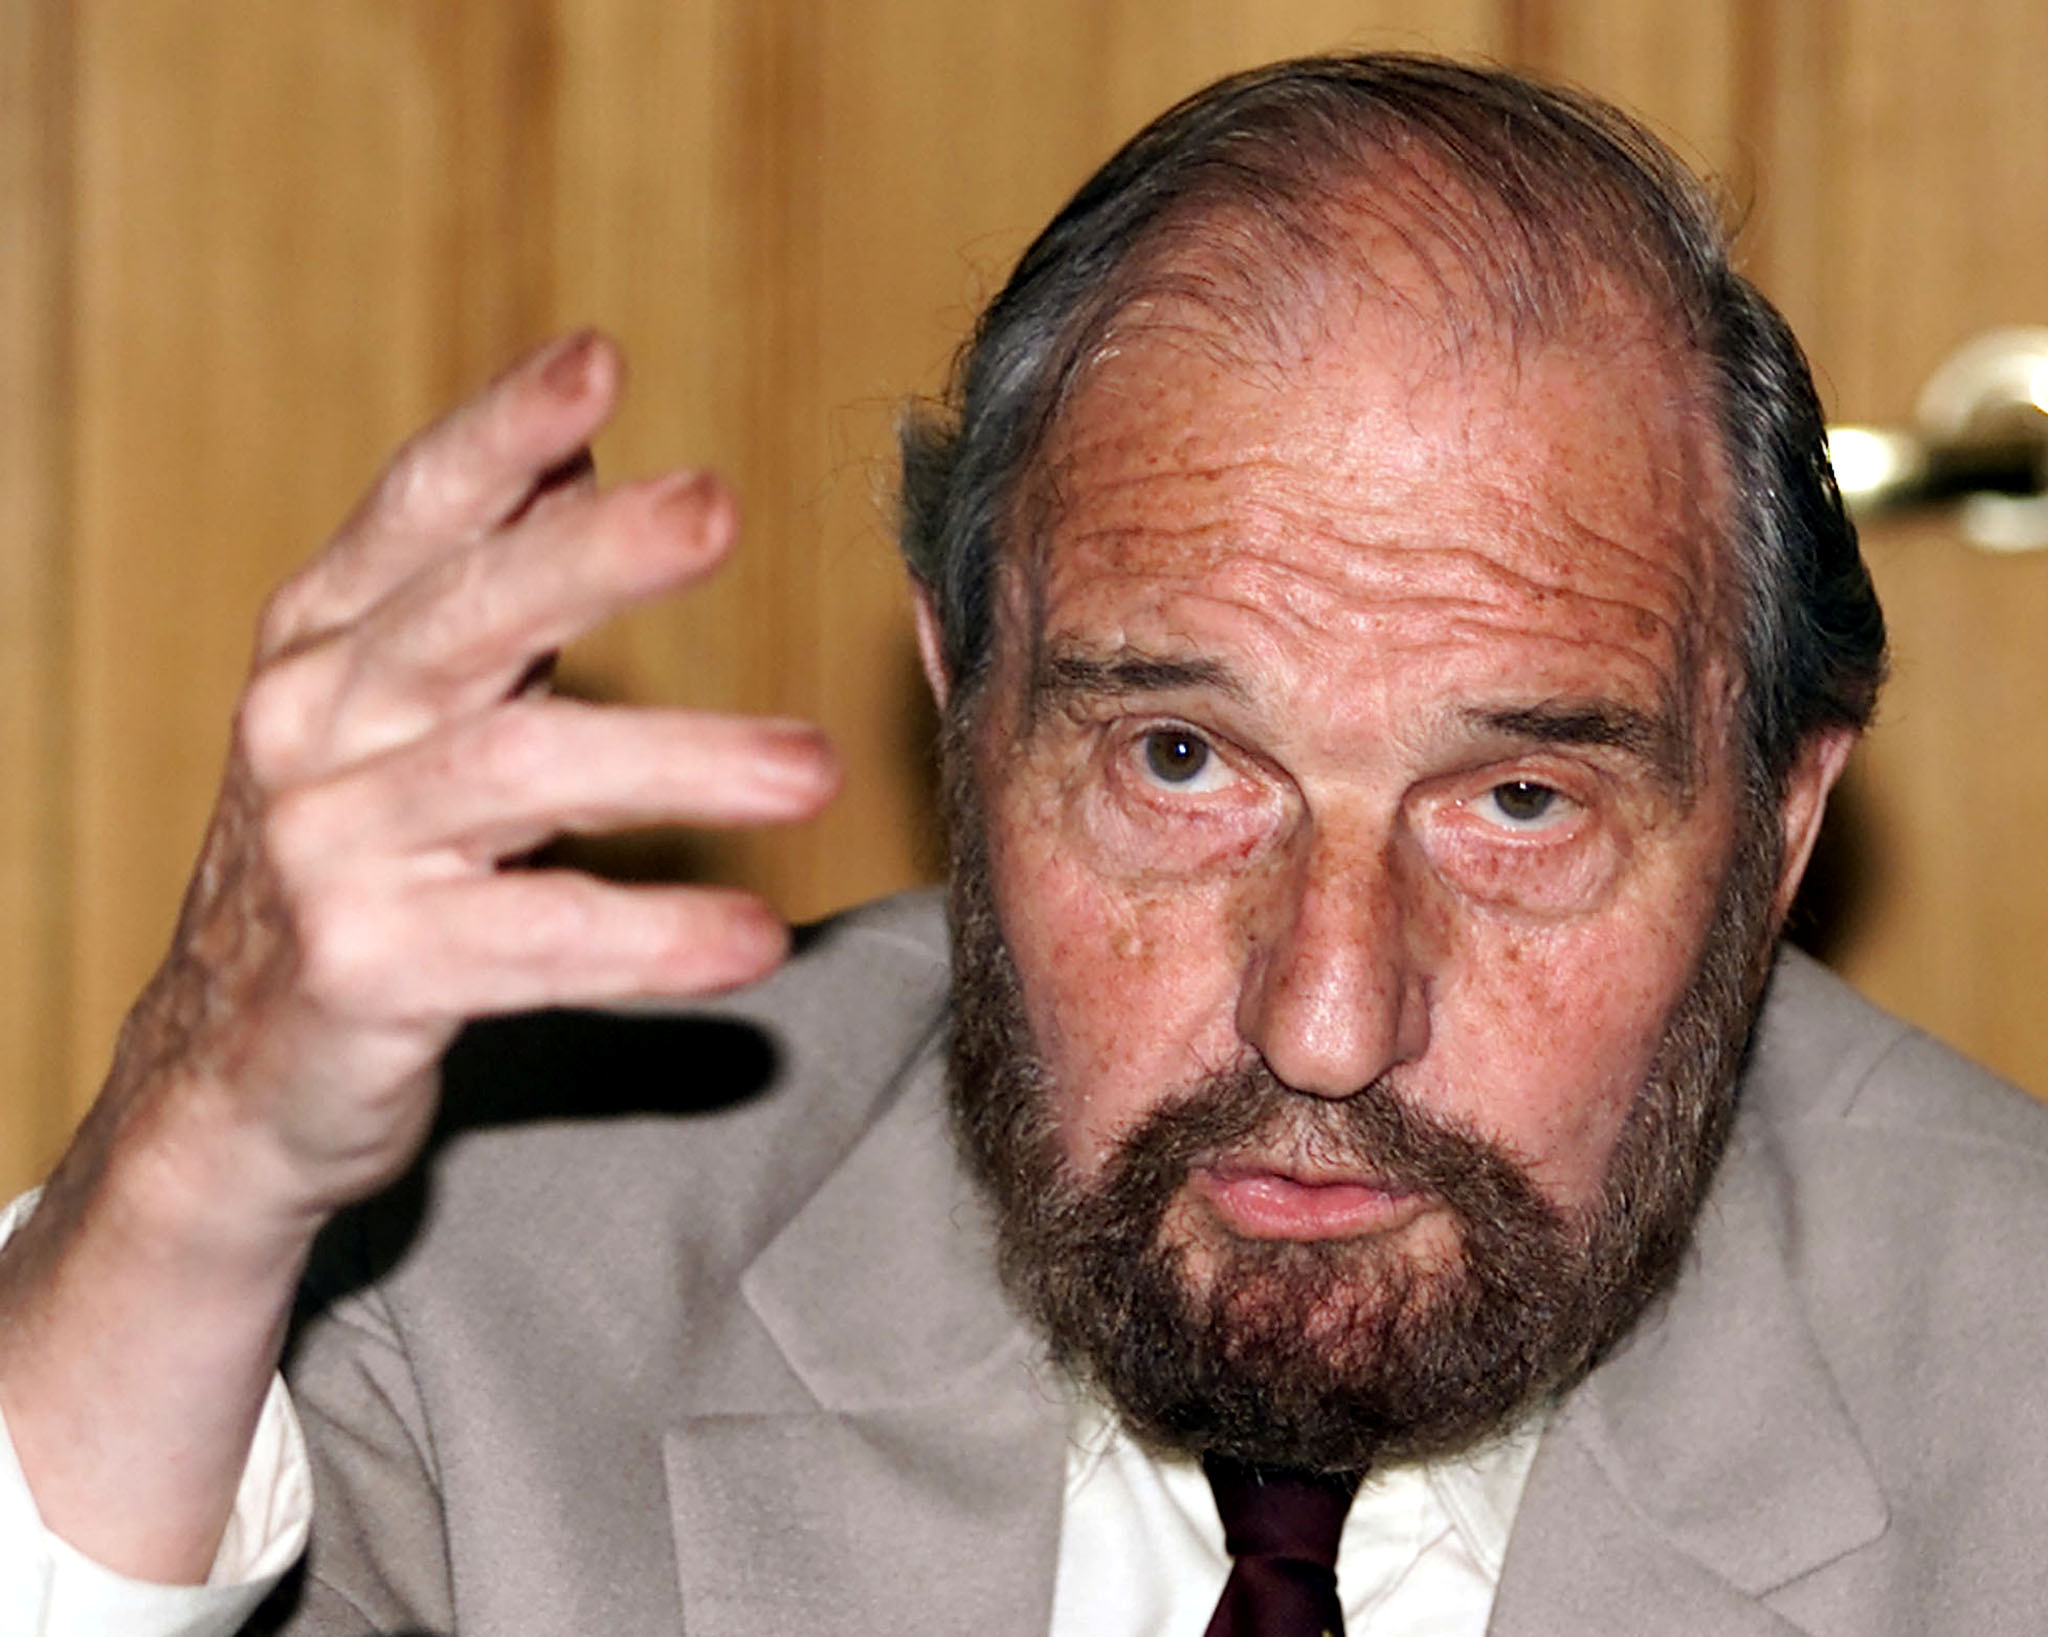 Soviet secret agent George Blake gestures as he speaks at a presentation of a book of letters written by other spies from a British prison, in Moscow June 28, 2001. Blake -- a notorious traitor in Britain and legendary hero in Russia -- escaped from a British jail in 1966 while serving a 42 year sentence for passing secrets to Moscow./File Photo